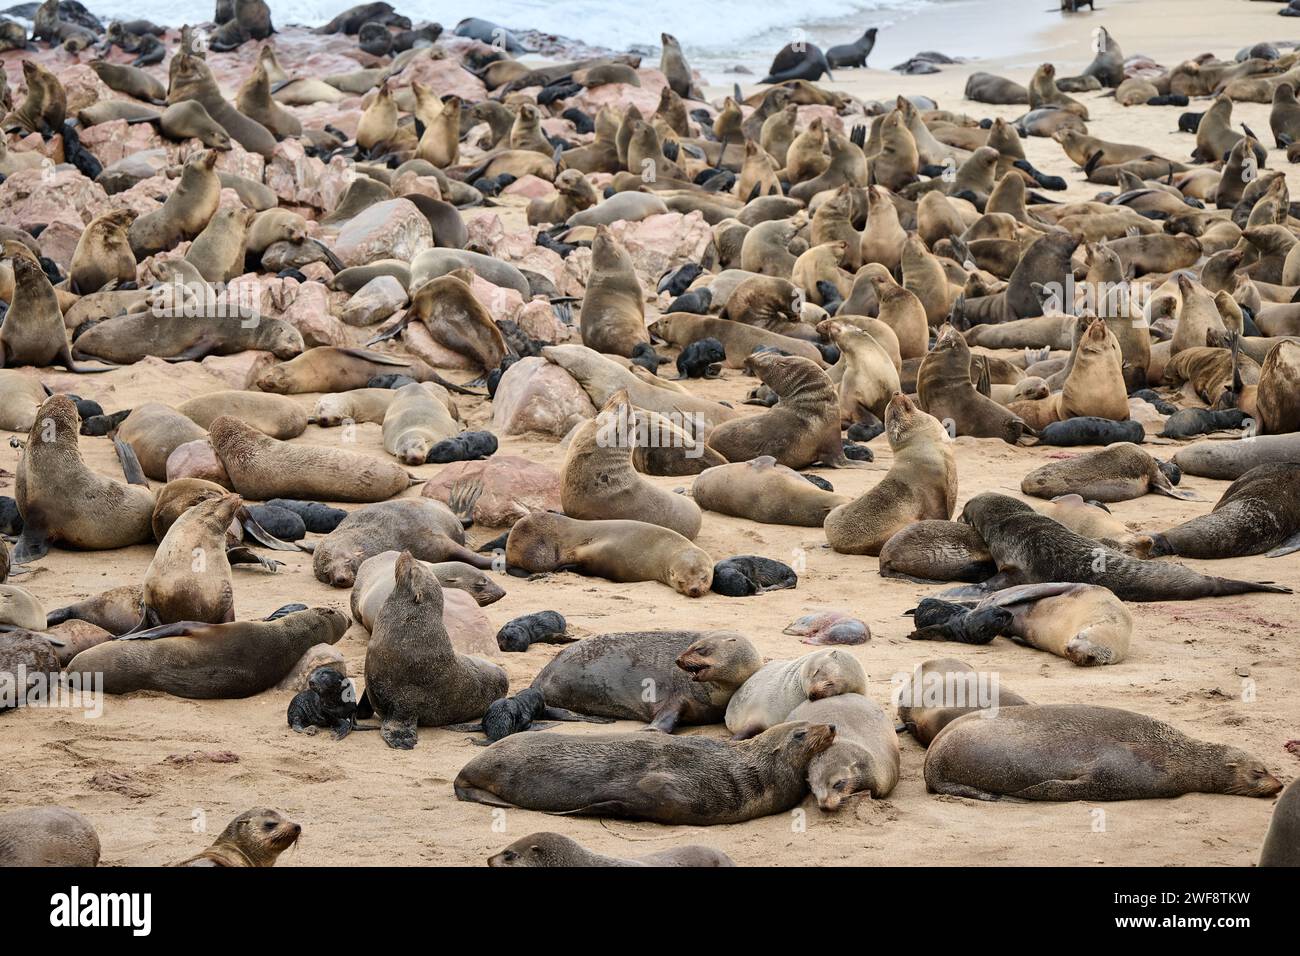 Brown fur seal colonies with babies, Cape Cross Seal Reserve, Namibia, Africa Stock Photo